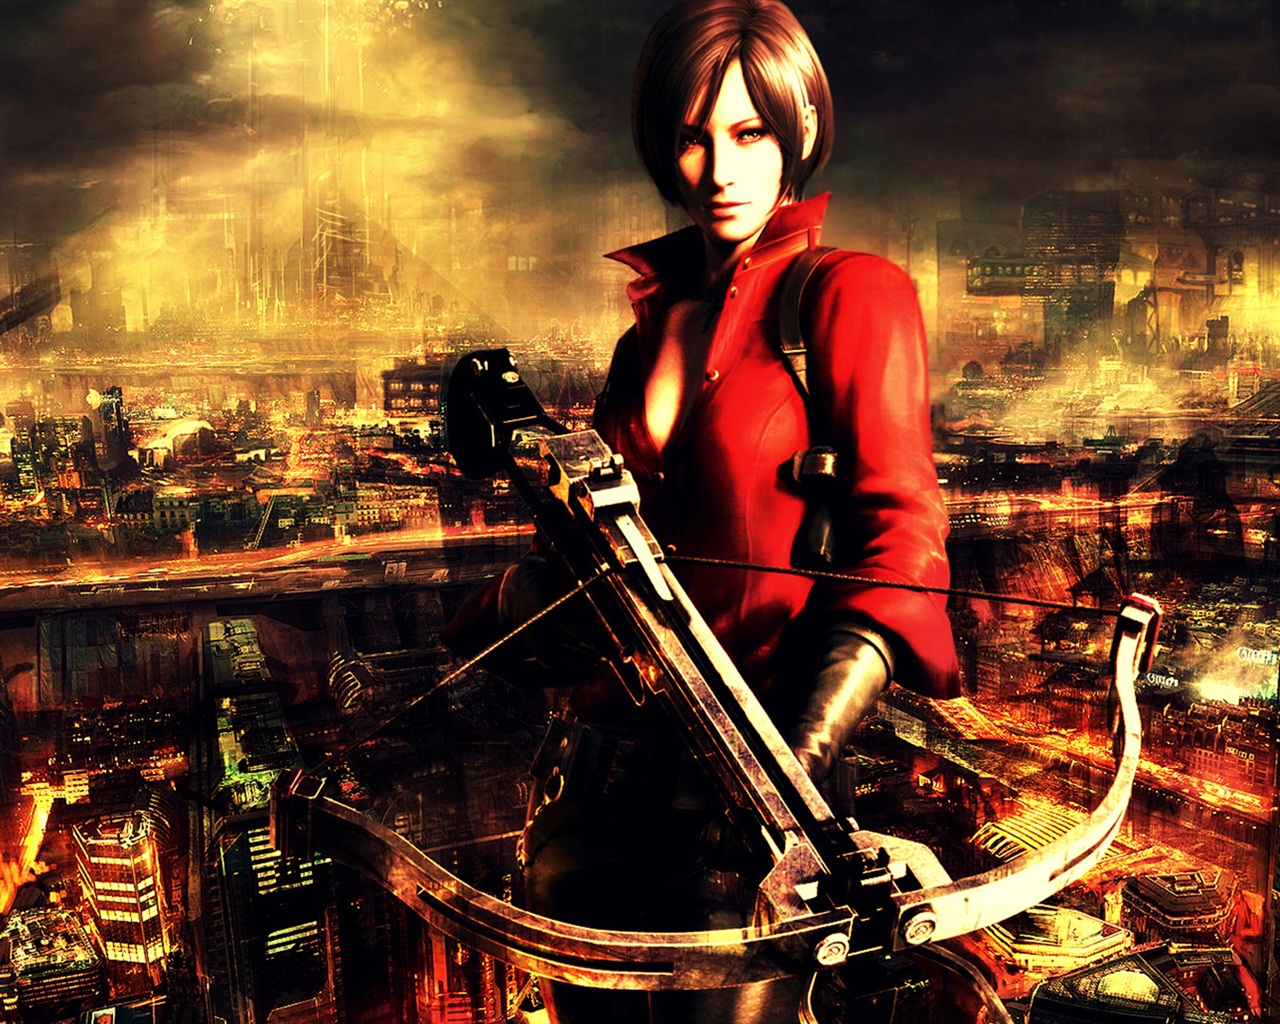 Resident Evil 6 HD game wallpapers #7 - 1280x1024